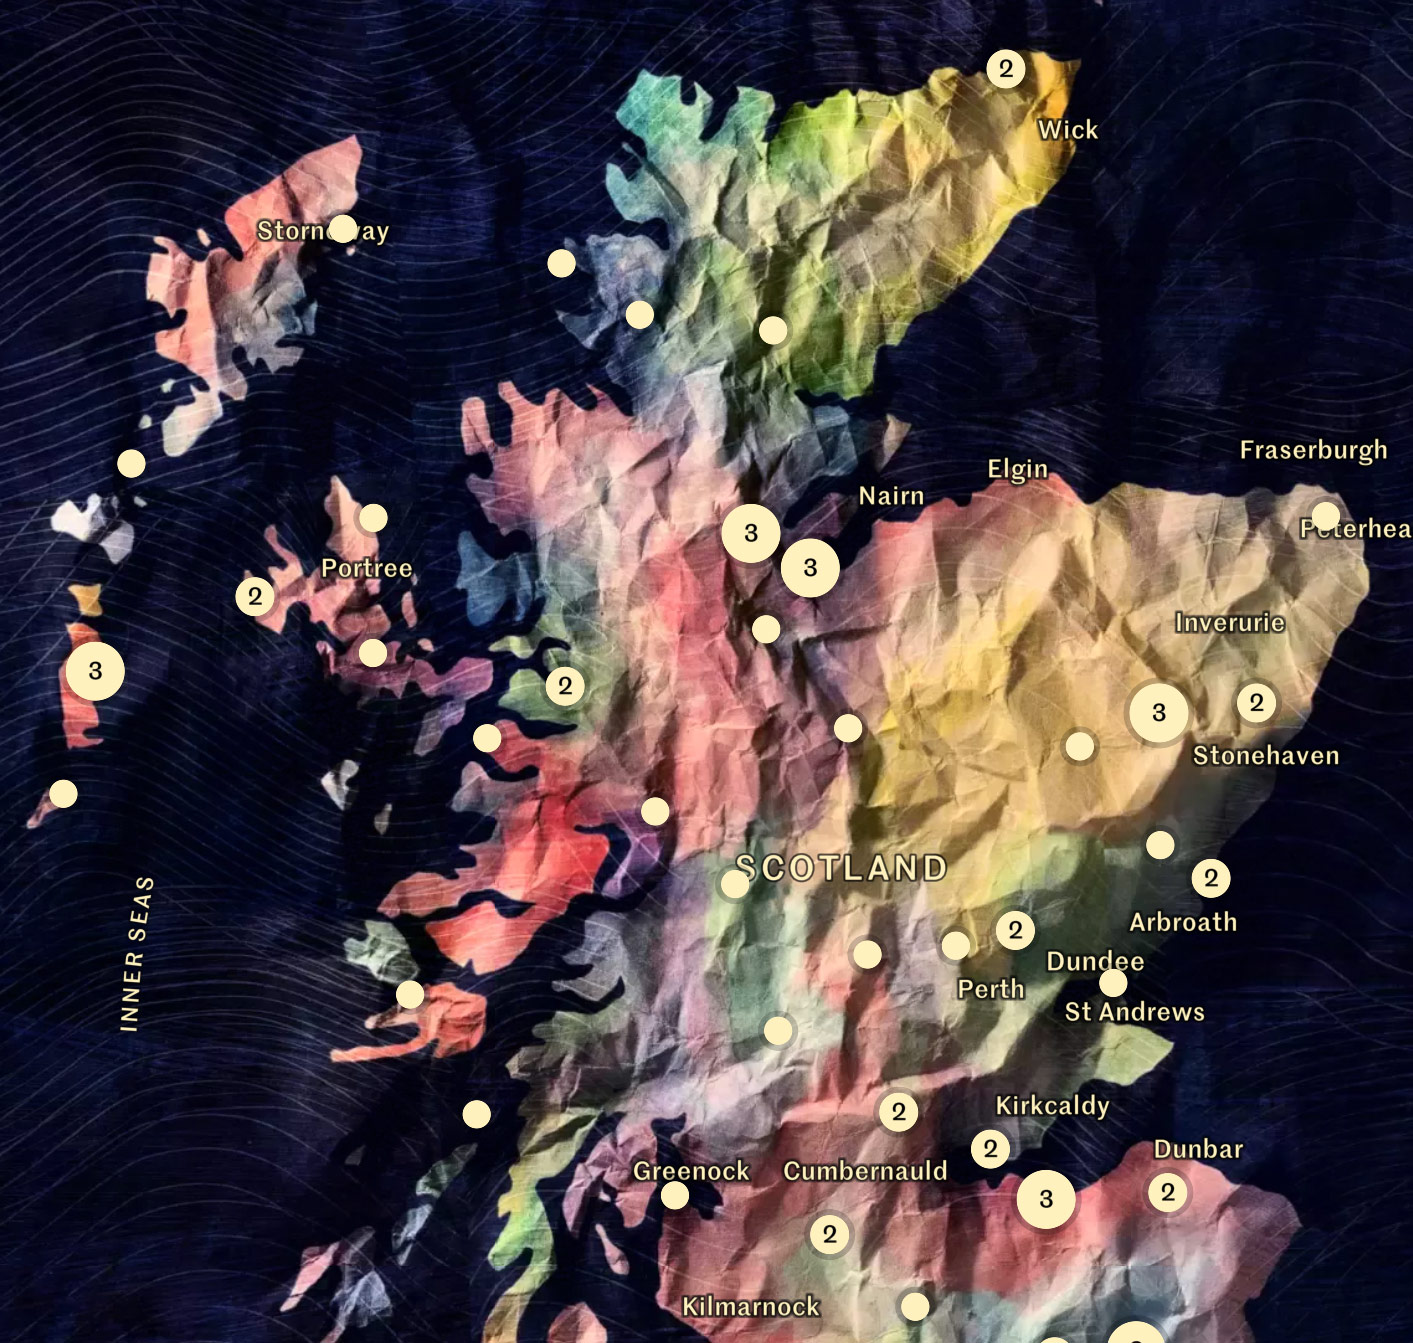 An illustrated map of Scotland with markers plotting Map of Stories entries